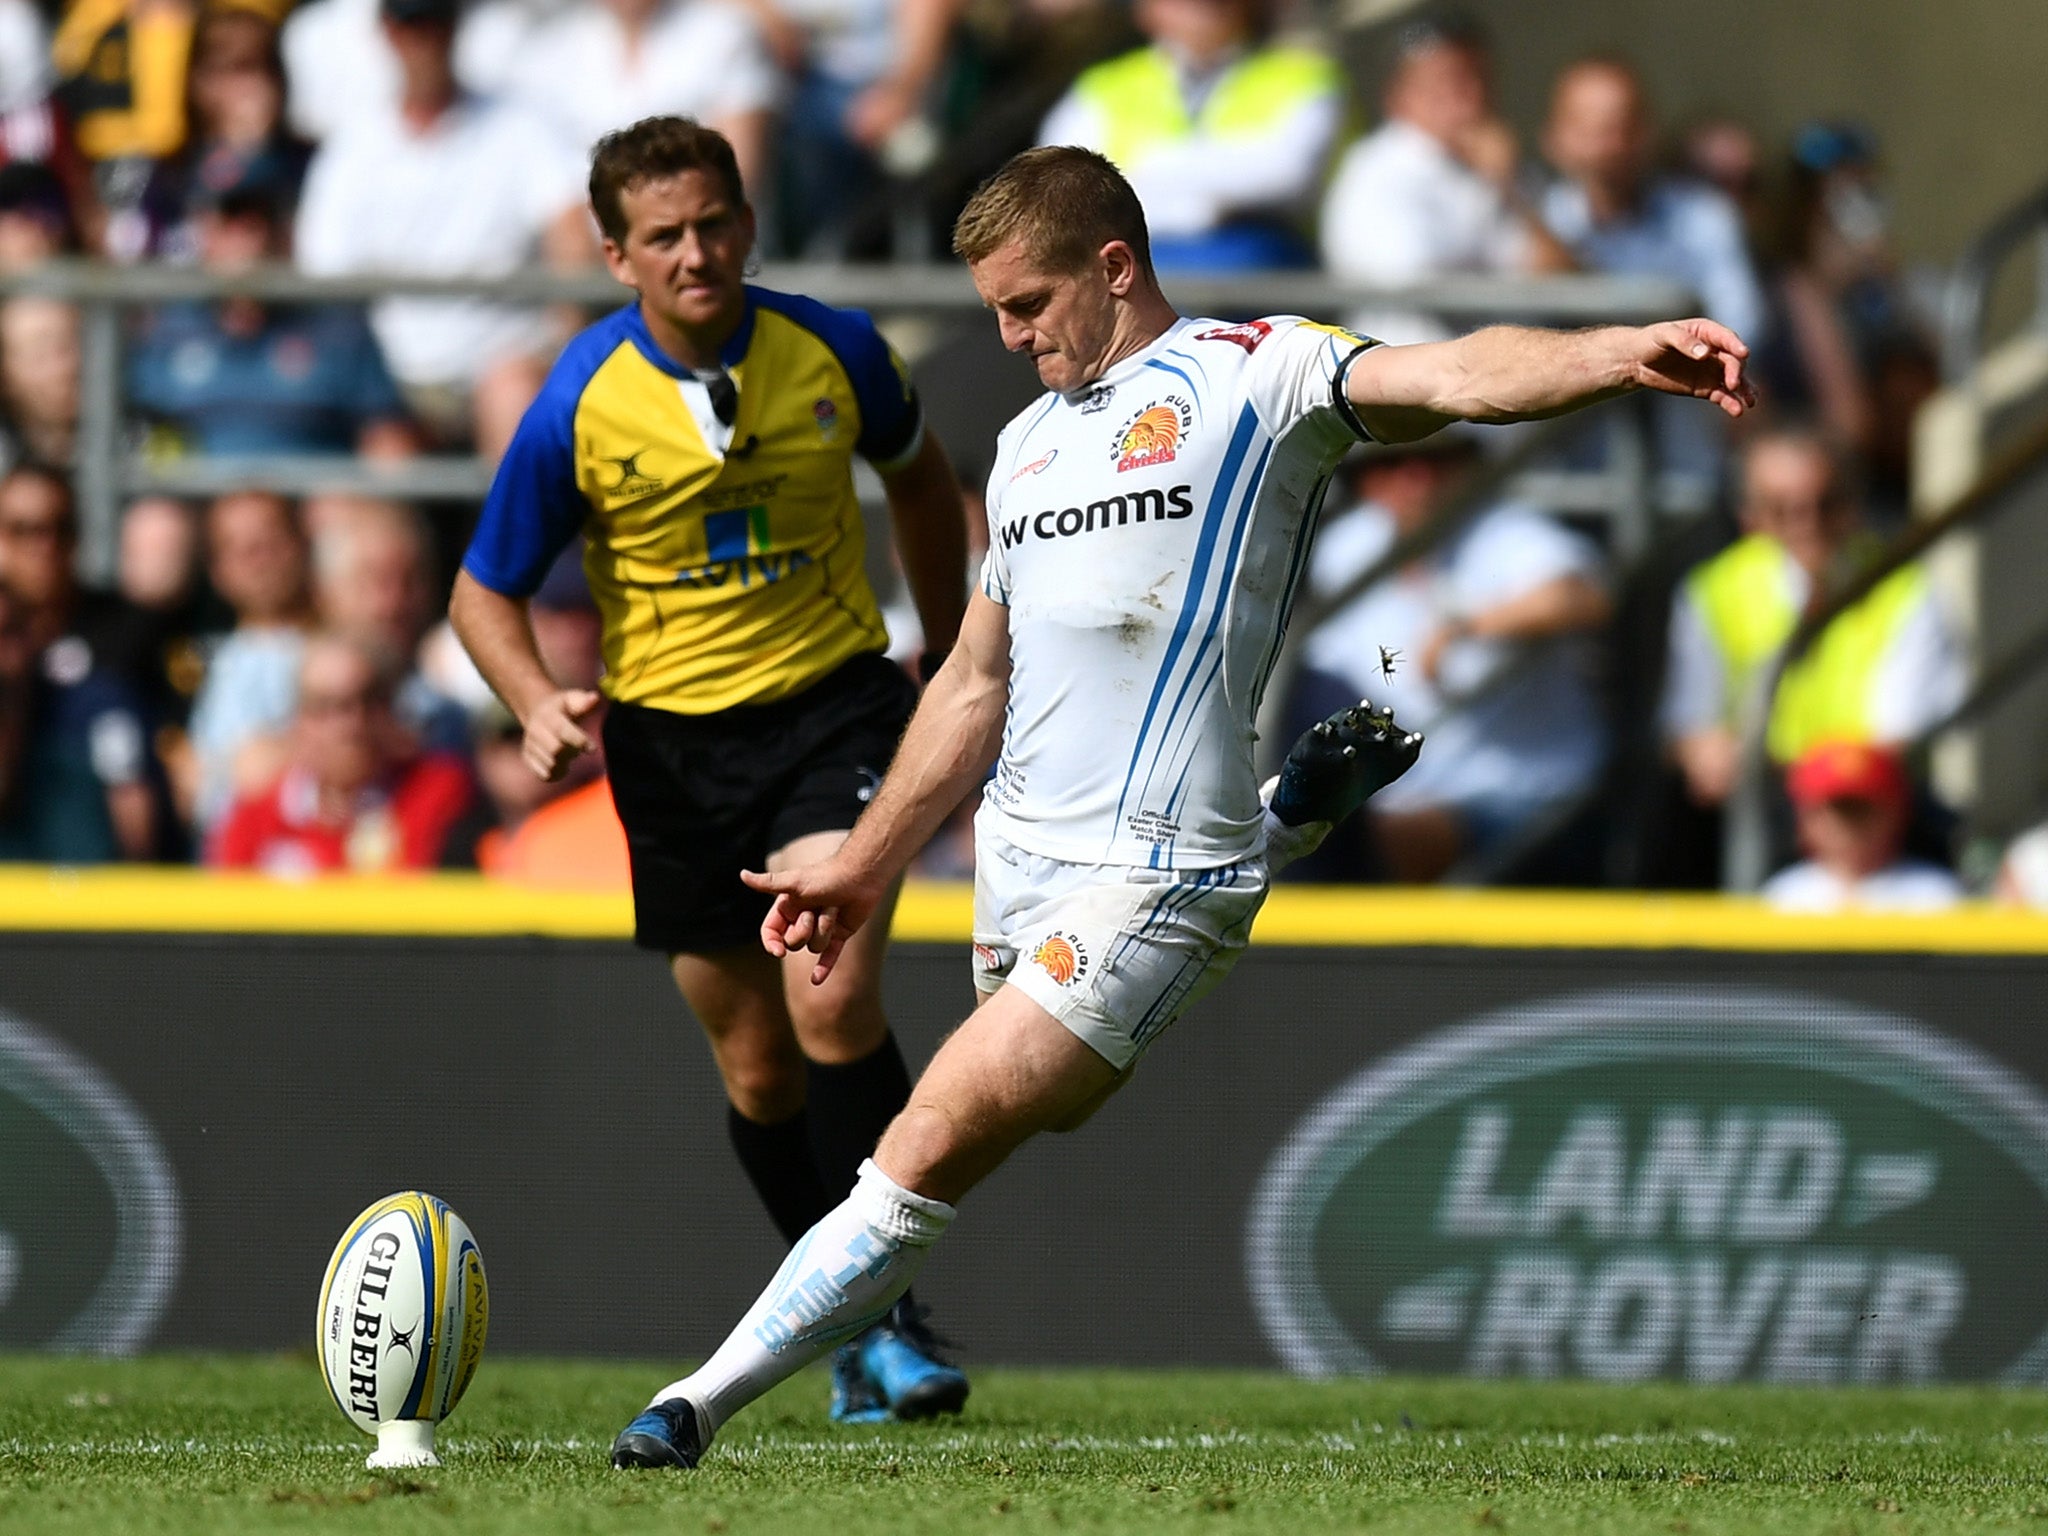 Gareth Steenson held his nerve brilliantly to win it for Exeter